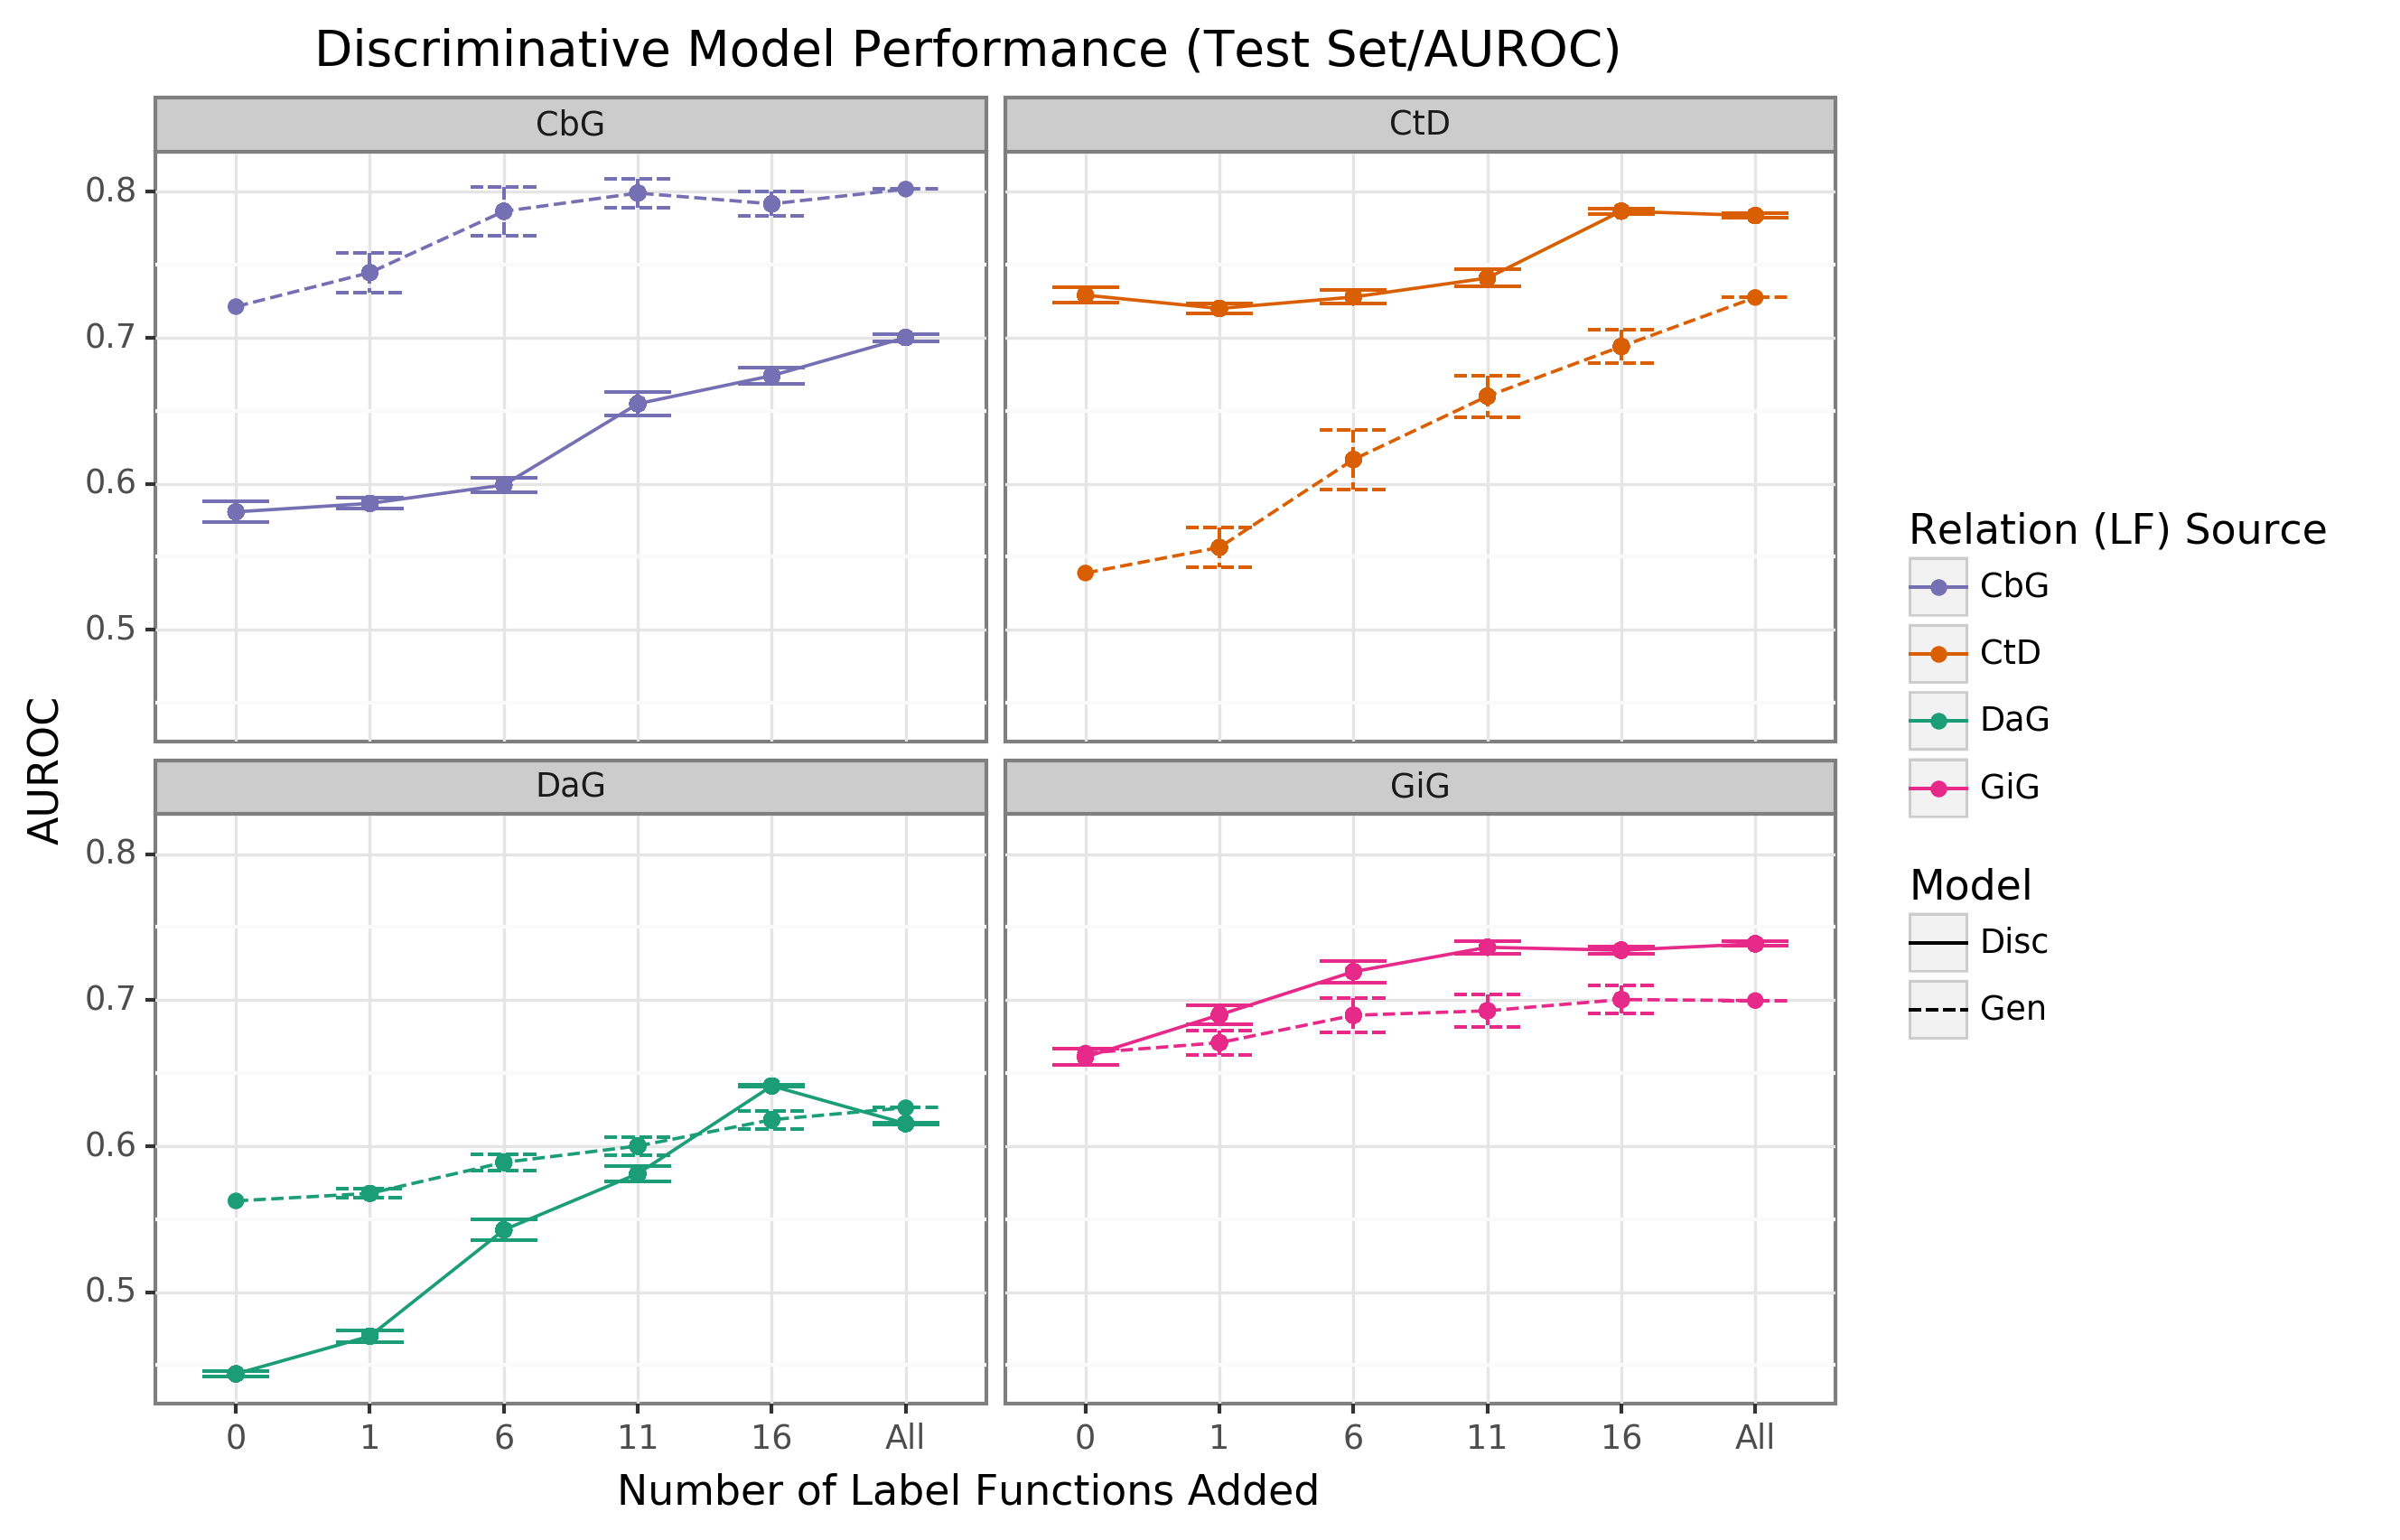 Figure 4: The discriminative model usually improves faster than the generative model as more edge-specific label functions are included. The line plot headers represent the specific edge type the discriminative model is trying to predict. The x-axis shows the number of randomly sampled label functions incorporated as an addition to the baseline model (the point at 0). The y axis shows the area under the receiver operating curve (AUROC). Each data point represents the average of 3 sample runs for the discriminator model and 50 sample runs for the generative model. The error bars represent each run’s 95% confidence interval. The baseline and “All” data points consist of sampling from the entire fixed set of label functions.